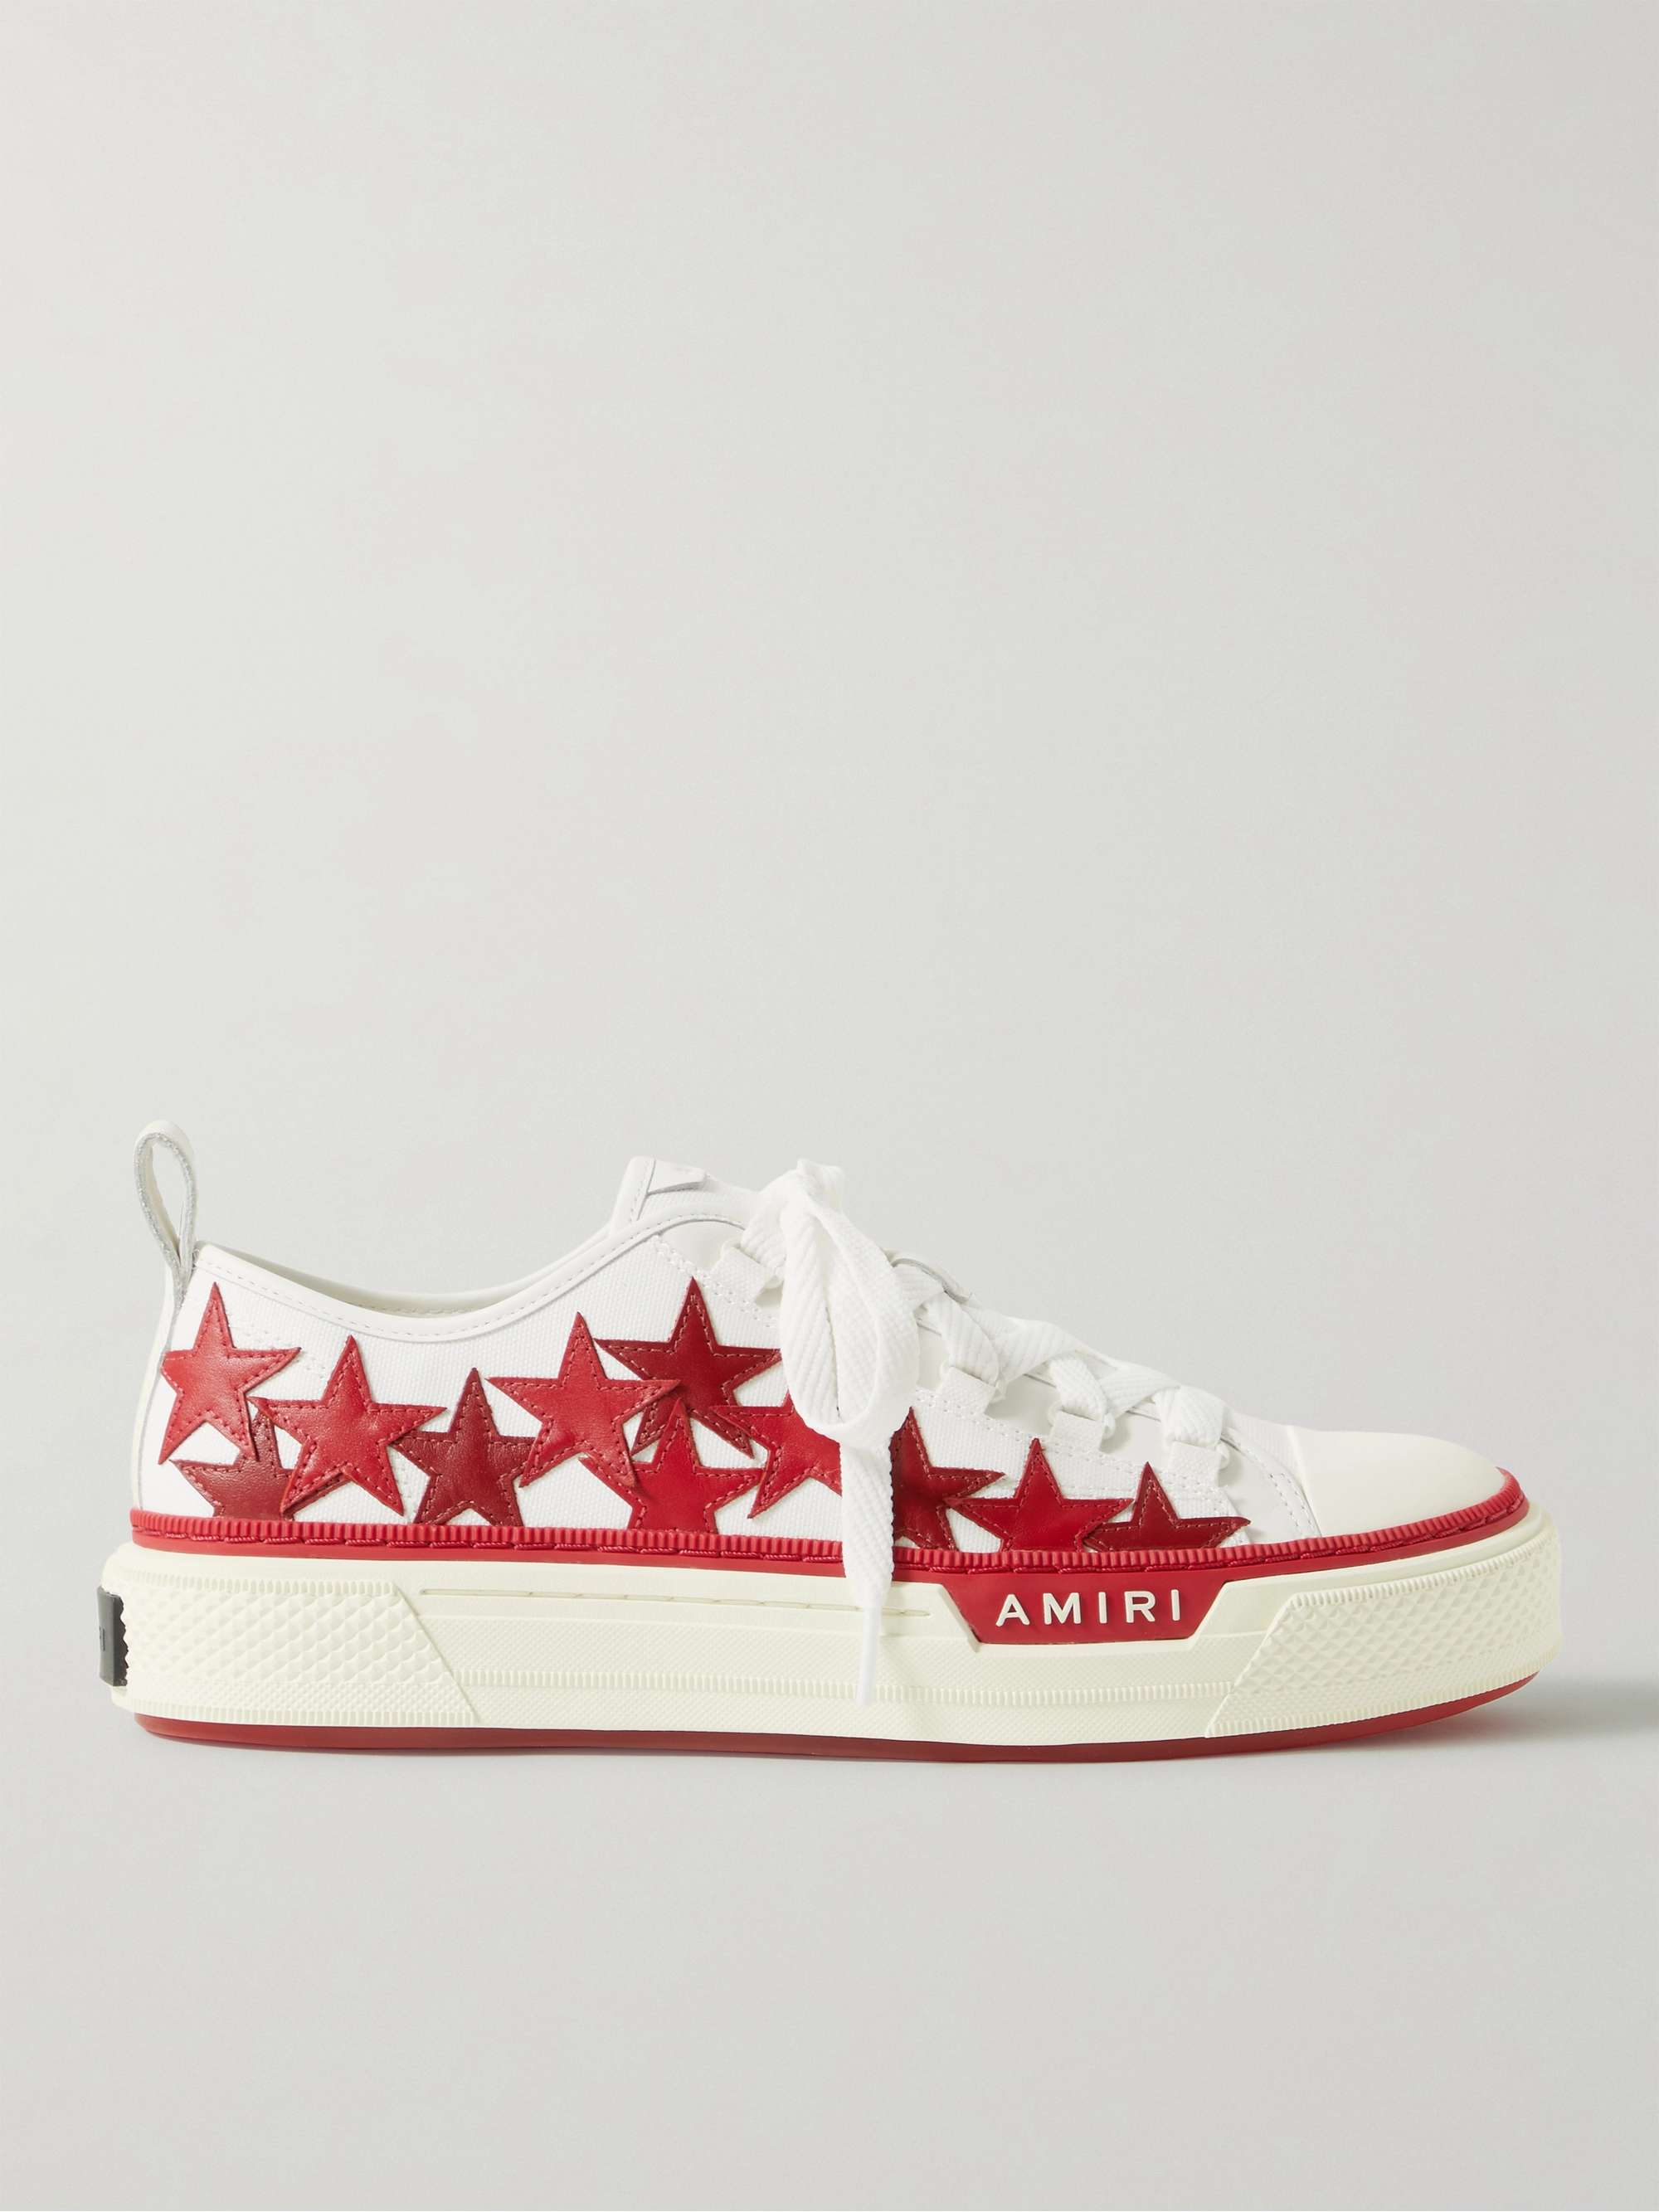 AMIRI Appliquéd Leather and Canvas Sneakers